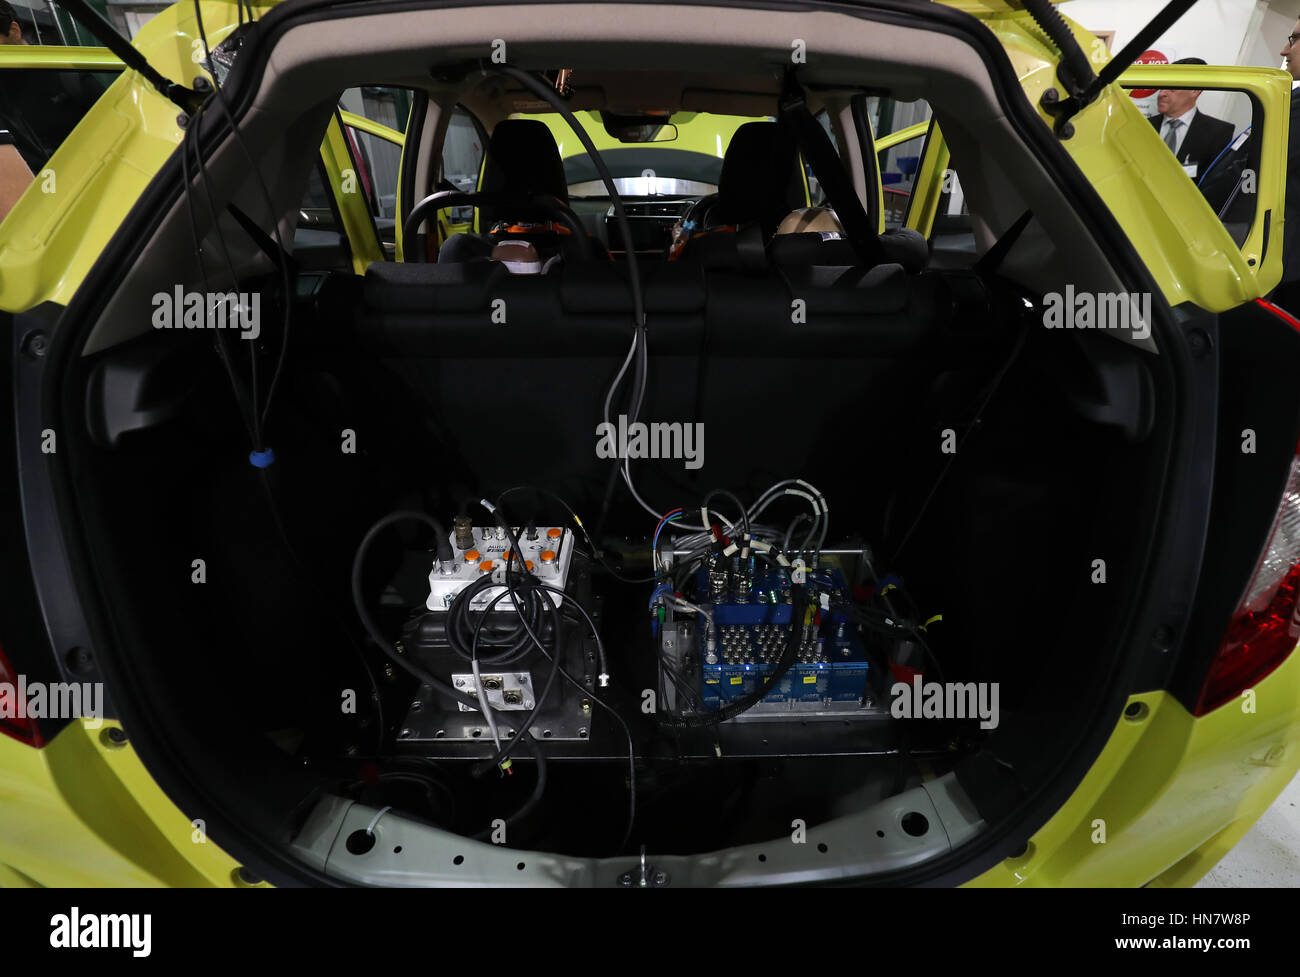 Electrics and telemetry wires in the boot of a Honda Jazz before a Euro NCAP test inside the crash test facility at Thatcham Research in Berskshire Stock Photo